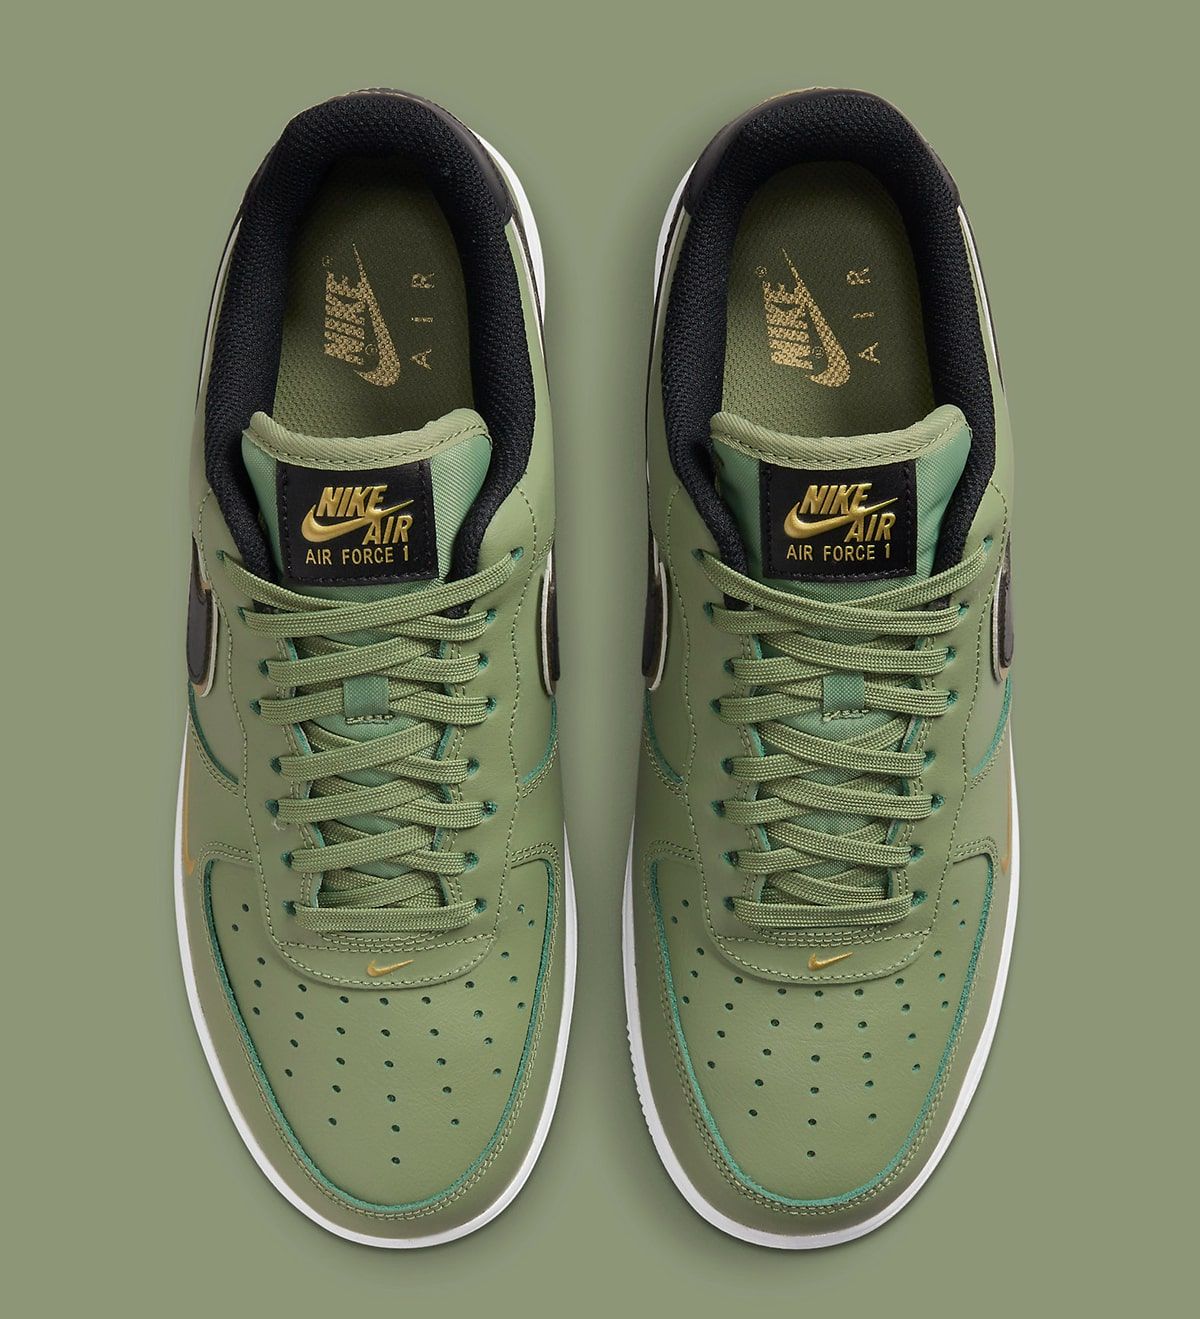 Nike Air Force 1 Low 07 LV8 Double Swoosh Olive Gold Black DA8481